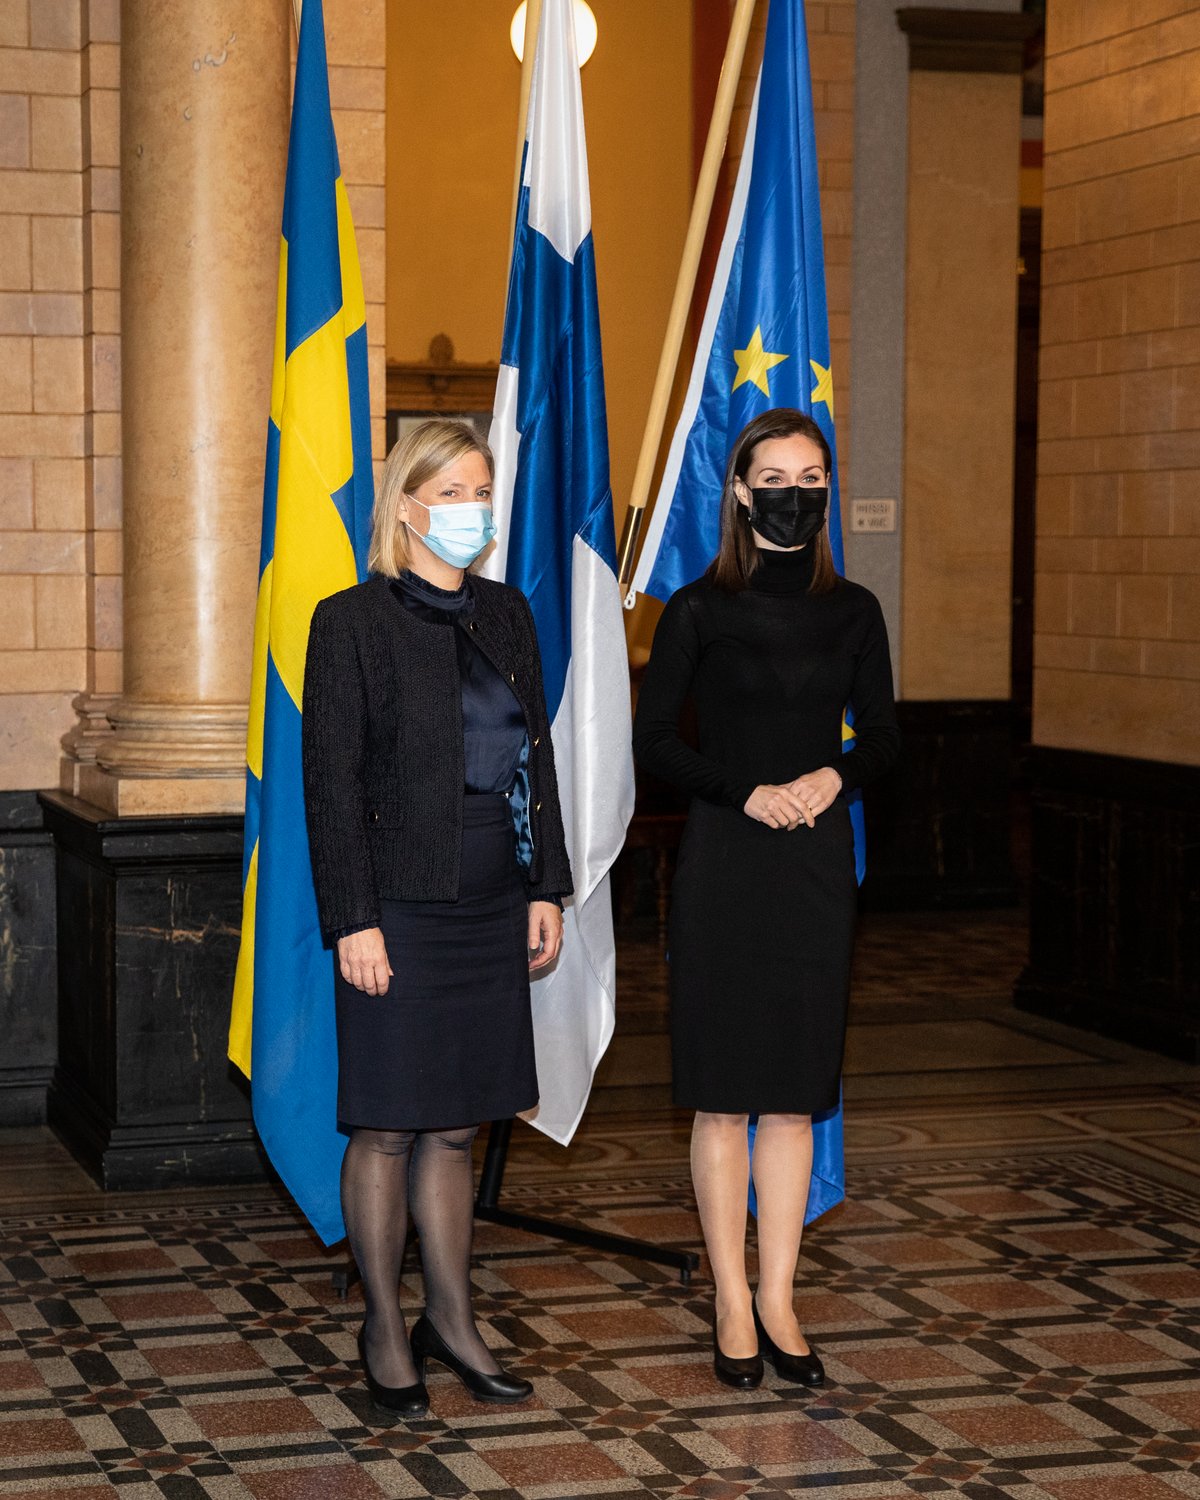 The Finnish Prime Minister is standing next to the Swedish Prime minister with their respective flags behind them as well as a flag for the EU. They are both wearing face masks.